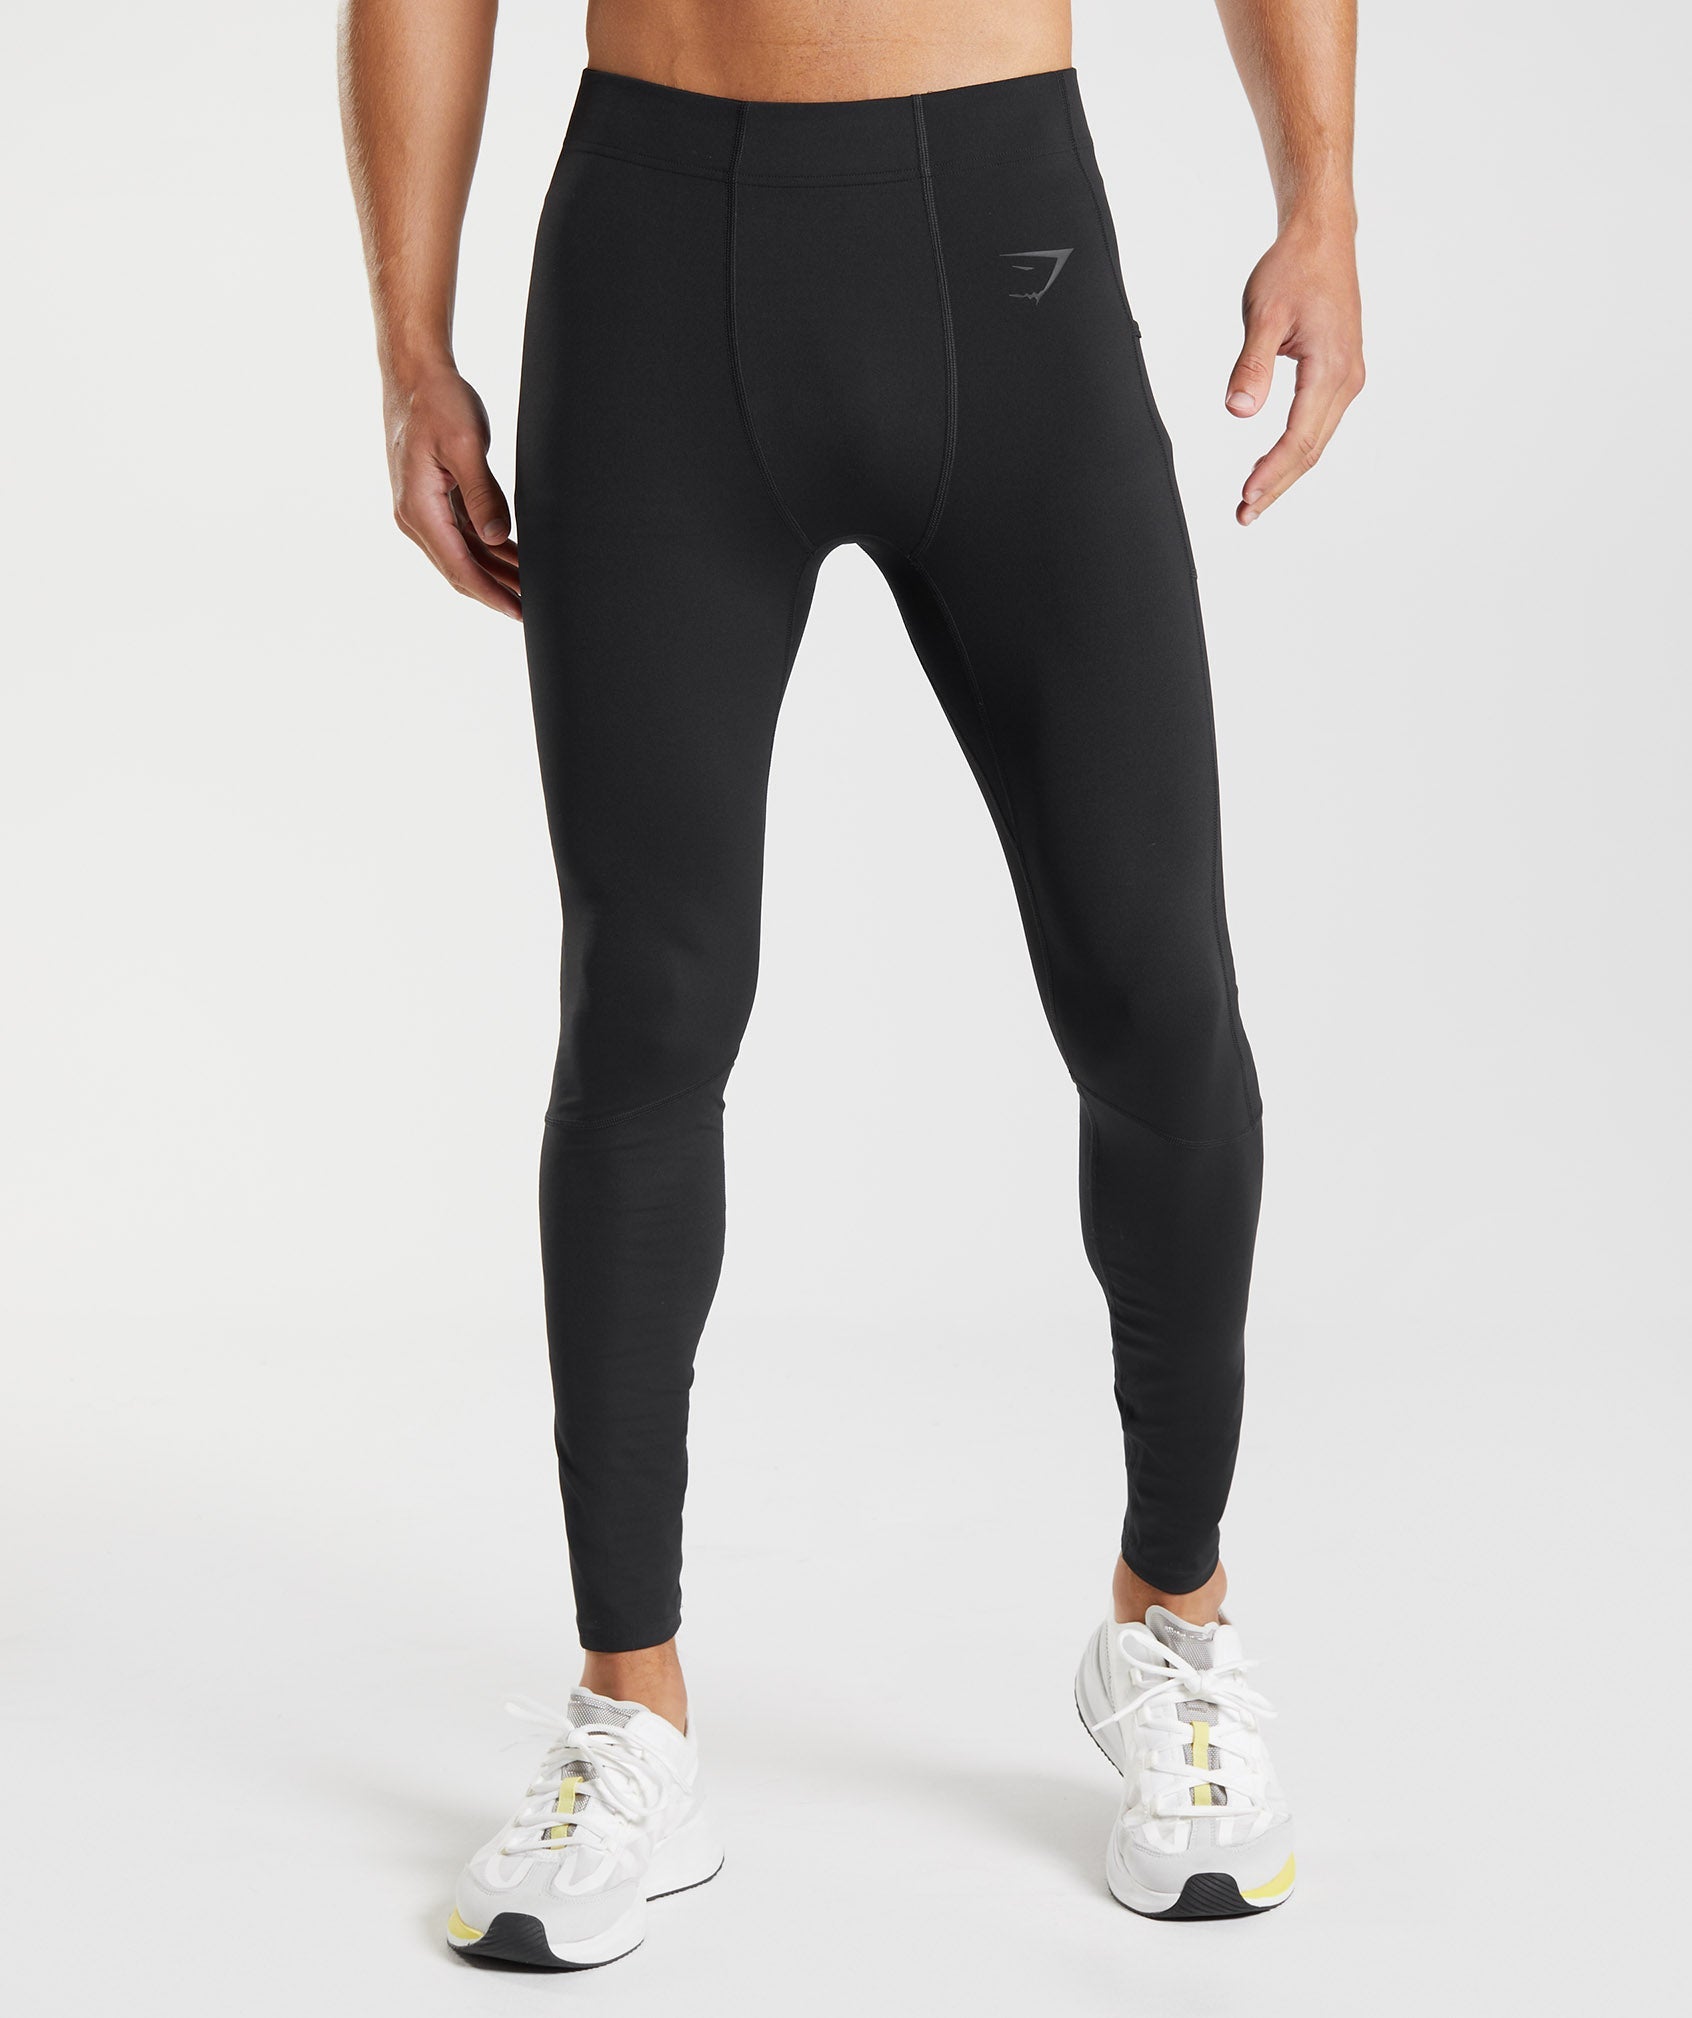 Compression Workout Leggings For Women - FineCompress